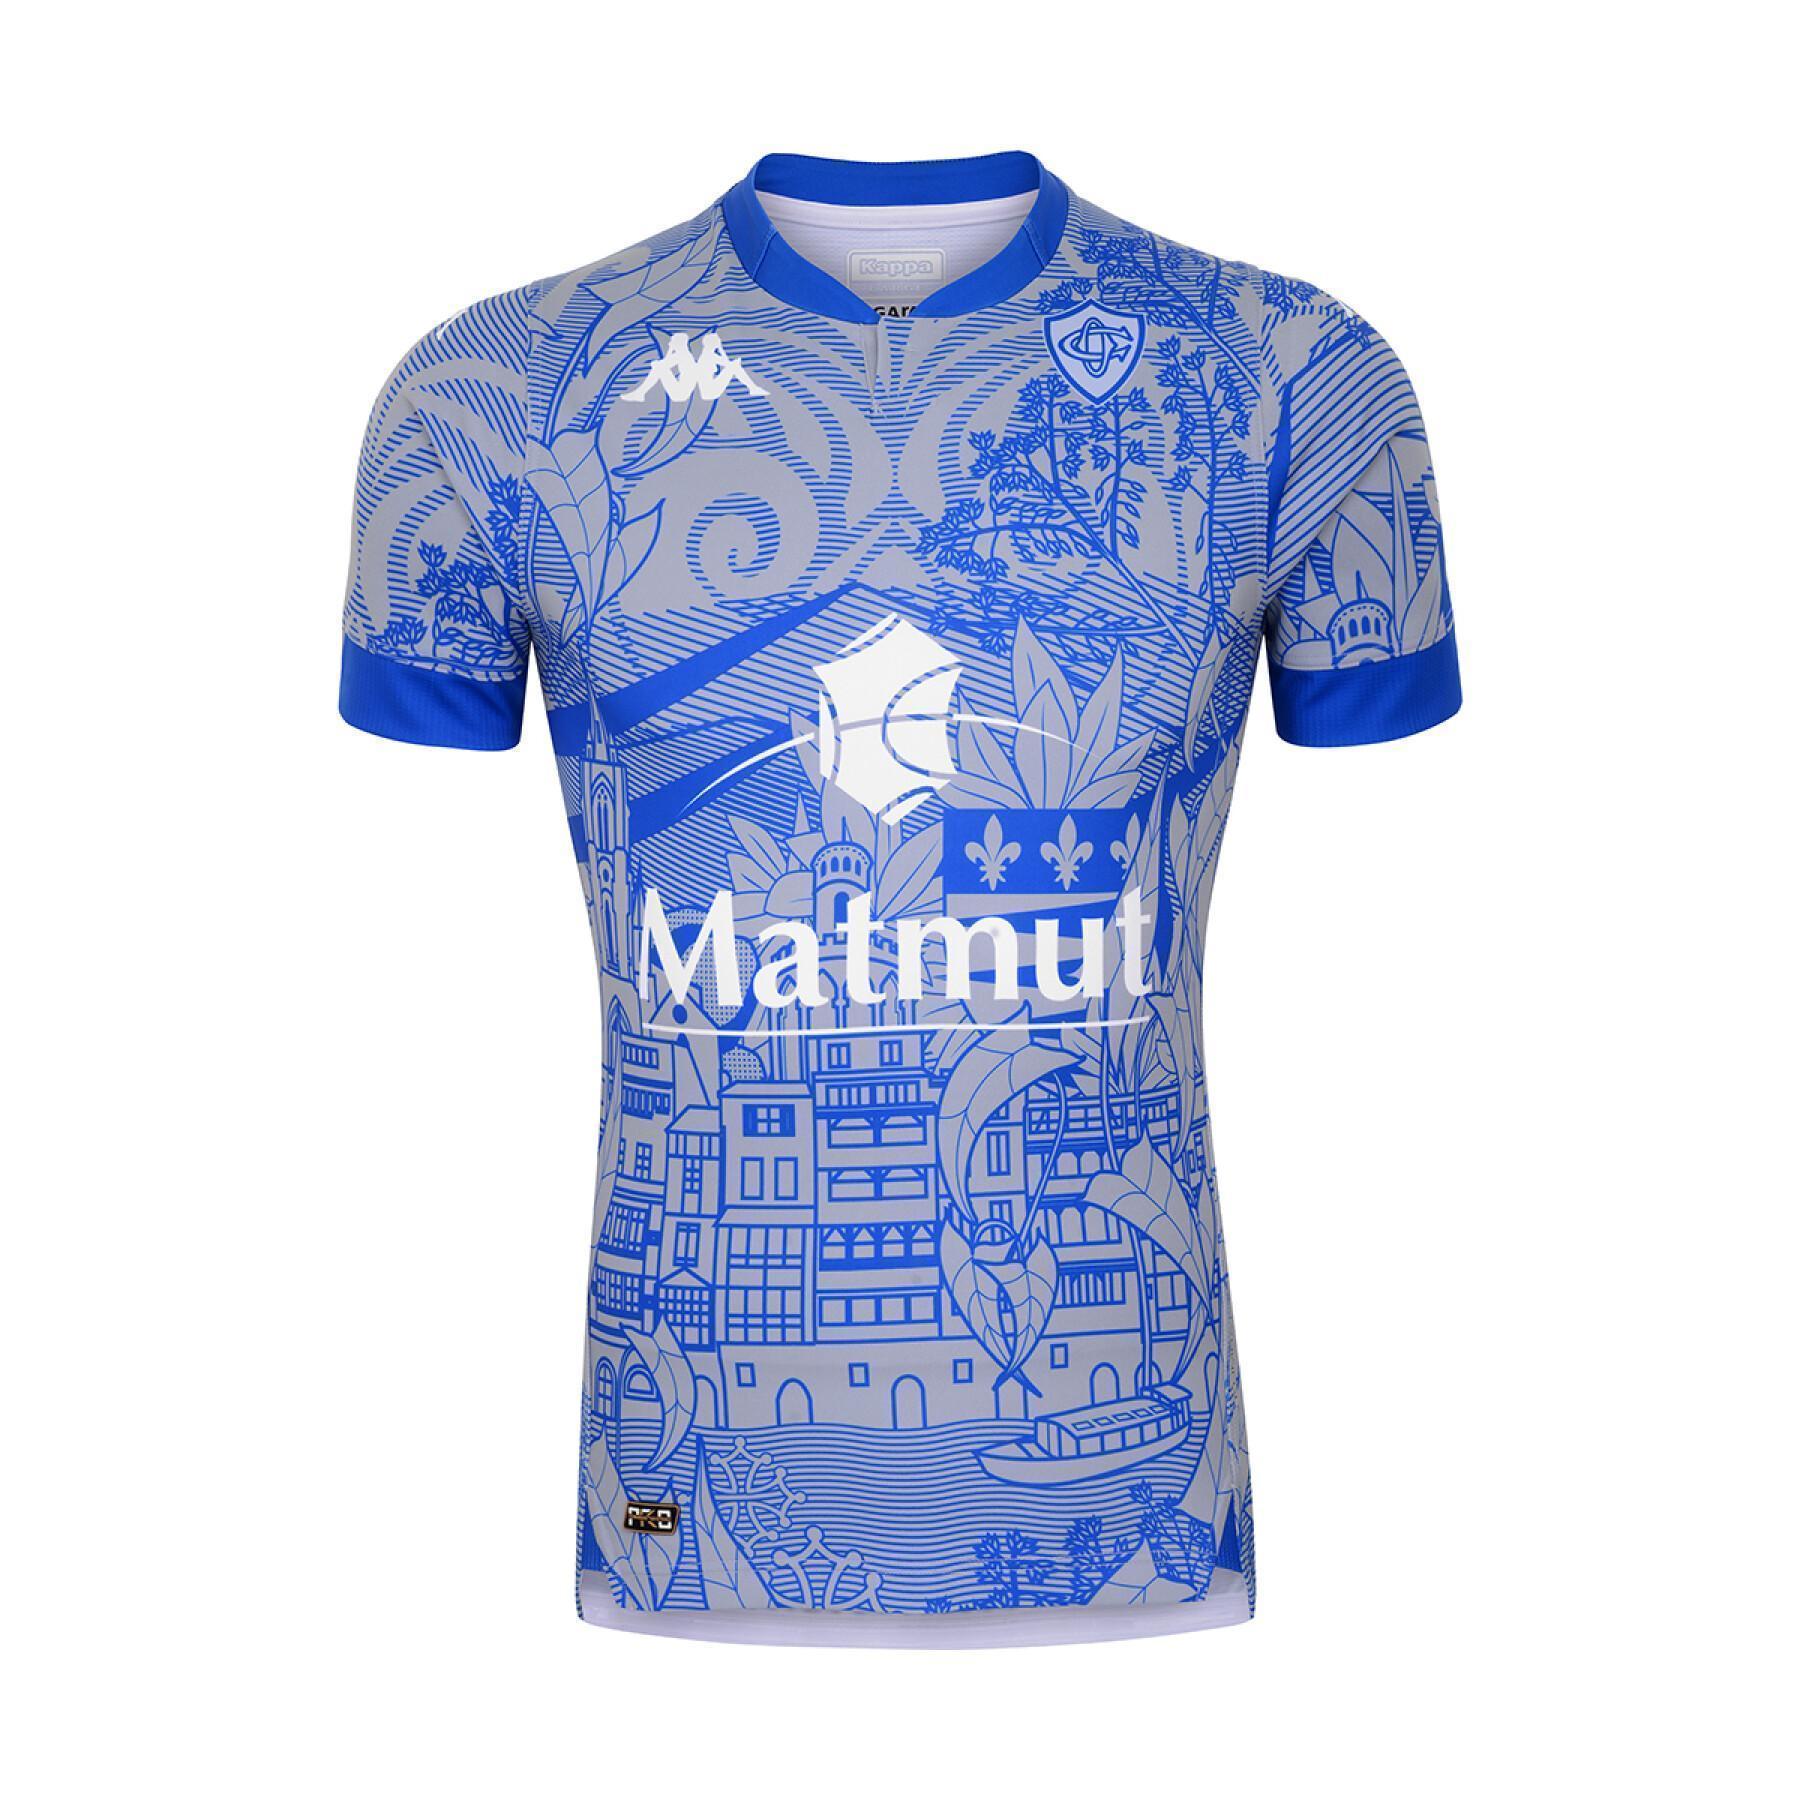 Authentic third jersey Castres Olympique 2020/21